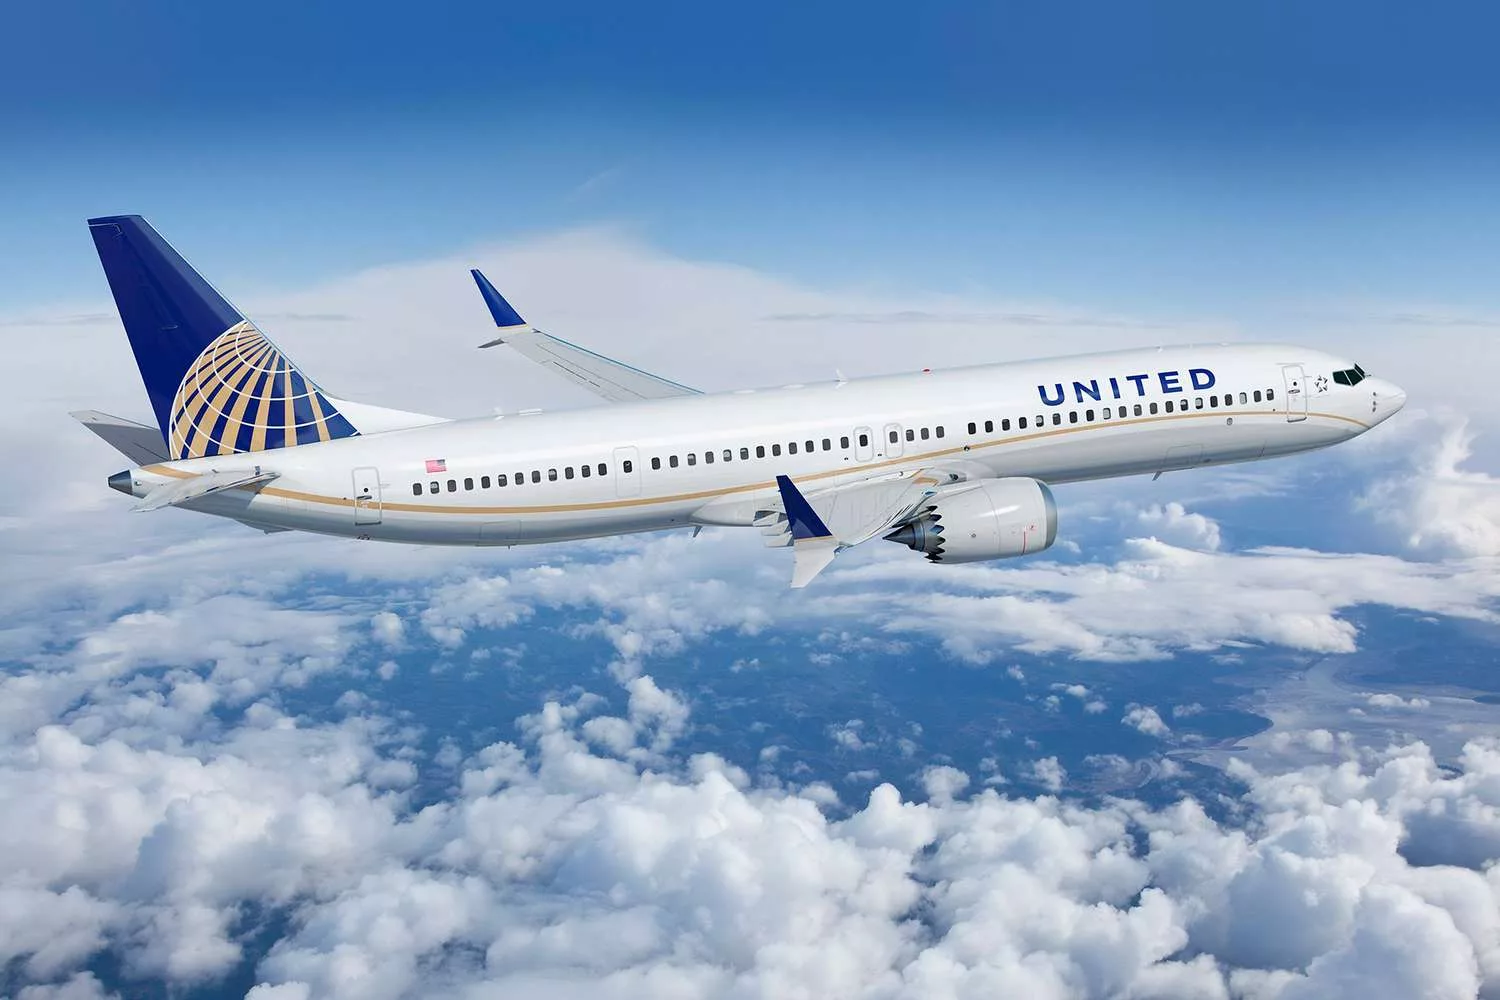 United Airlines offering 1,000,000 mile prize for MileagePlus Members in the “Jet Set & Reset” Pledge